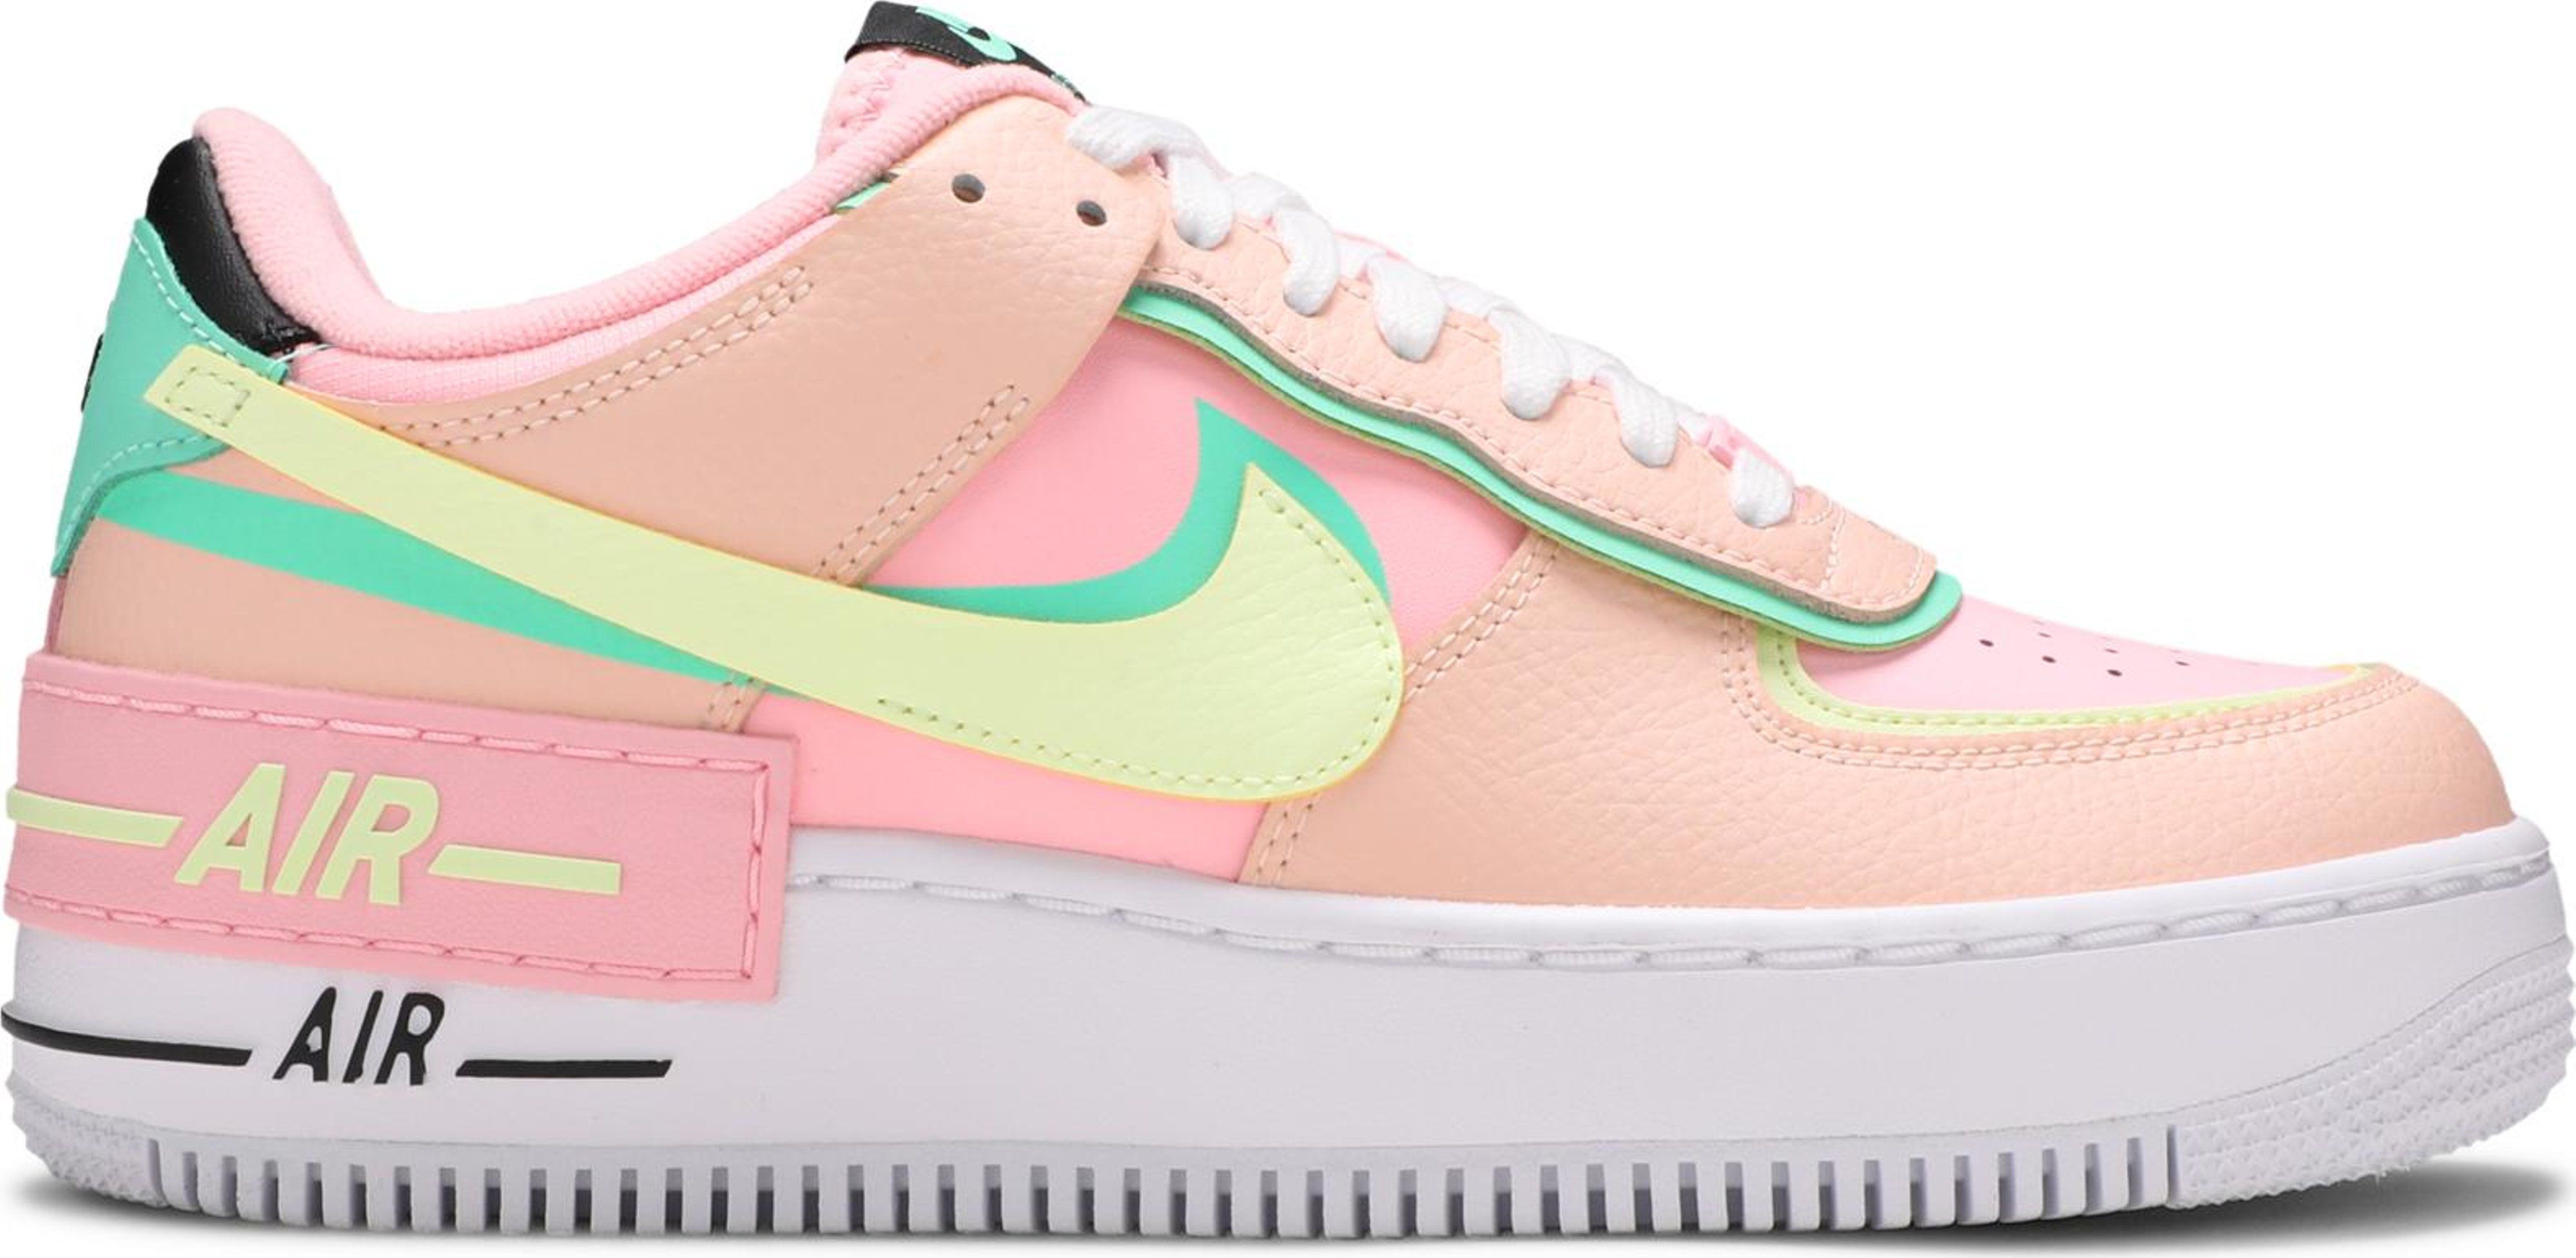 Wmns Air Force 1 Shadow 'Arctic Punch Barely Volt' | GOAT